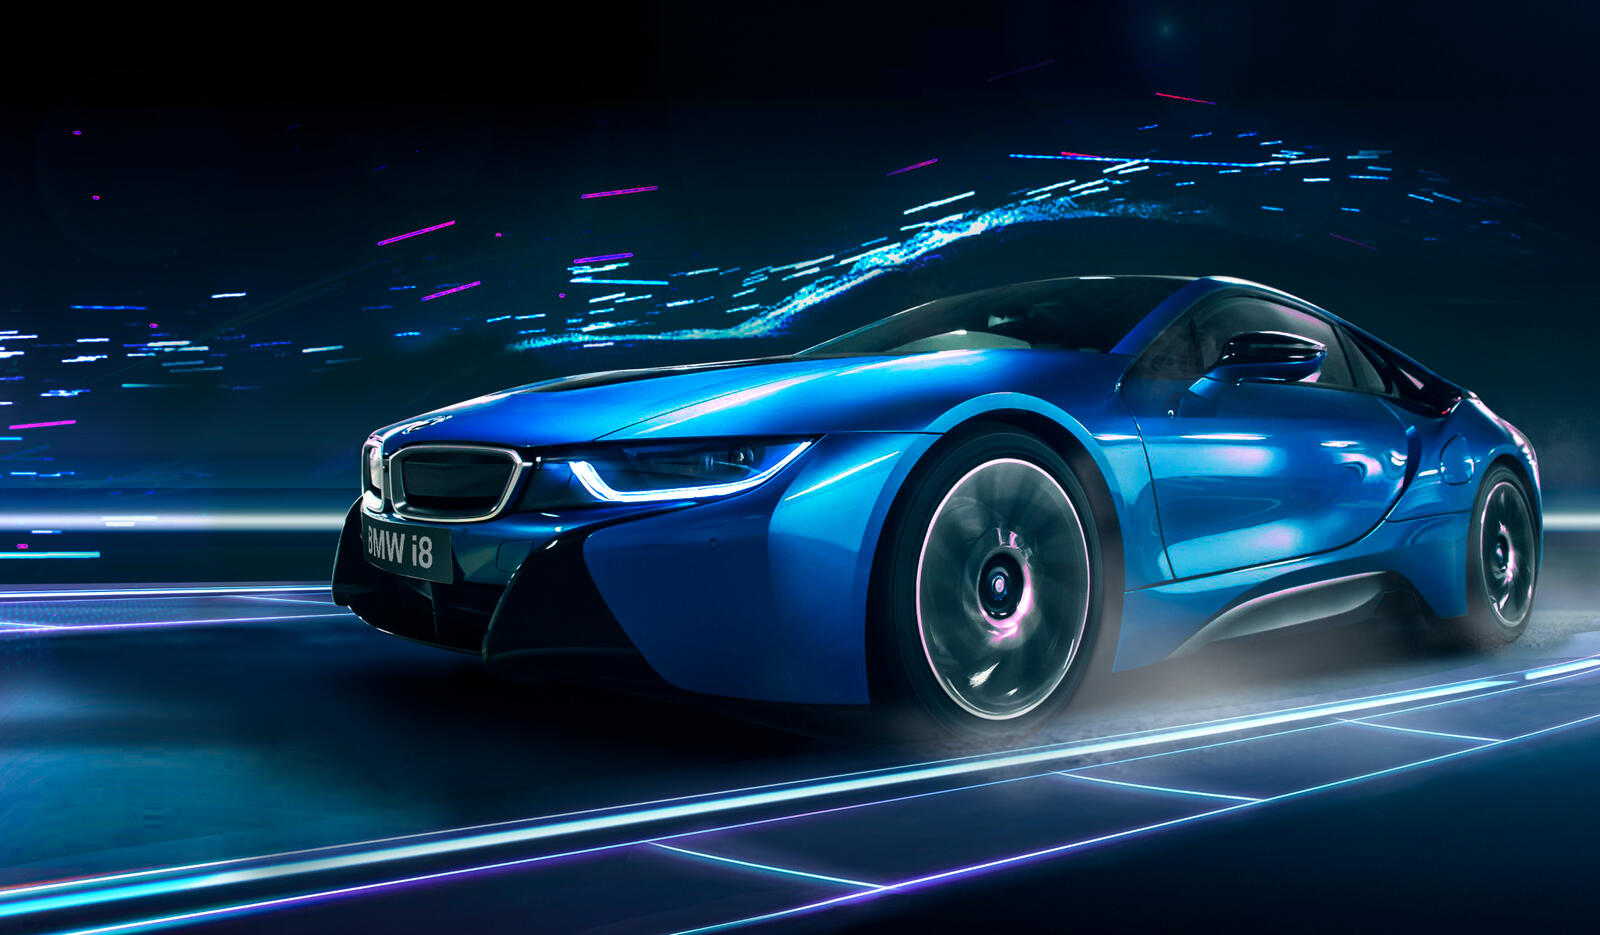 Wallpapers BMW I8 blue electric vehicle on the desktop